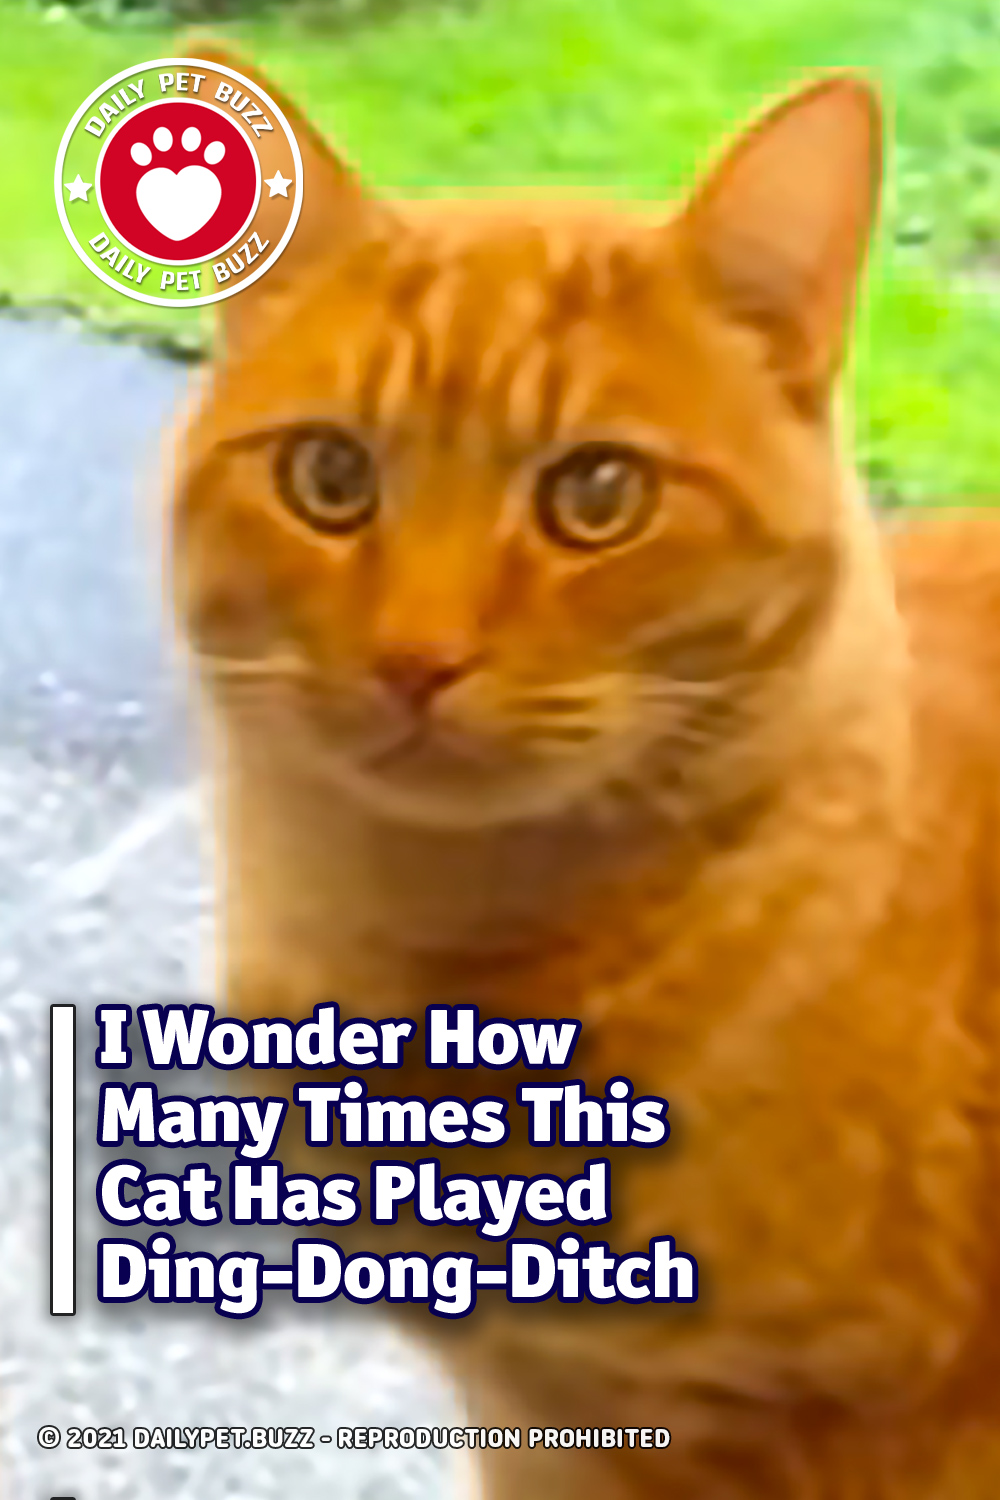 I Wonder How Many Times This Cat Has Played Ding-Dong-Ditch